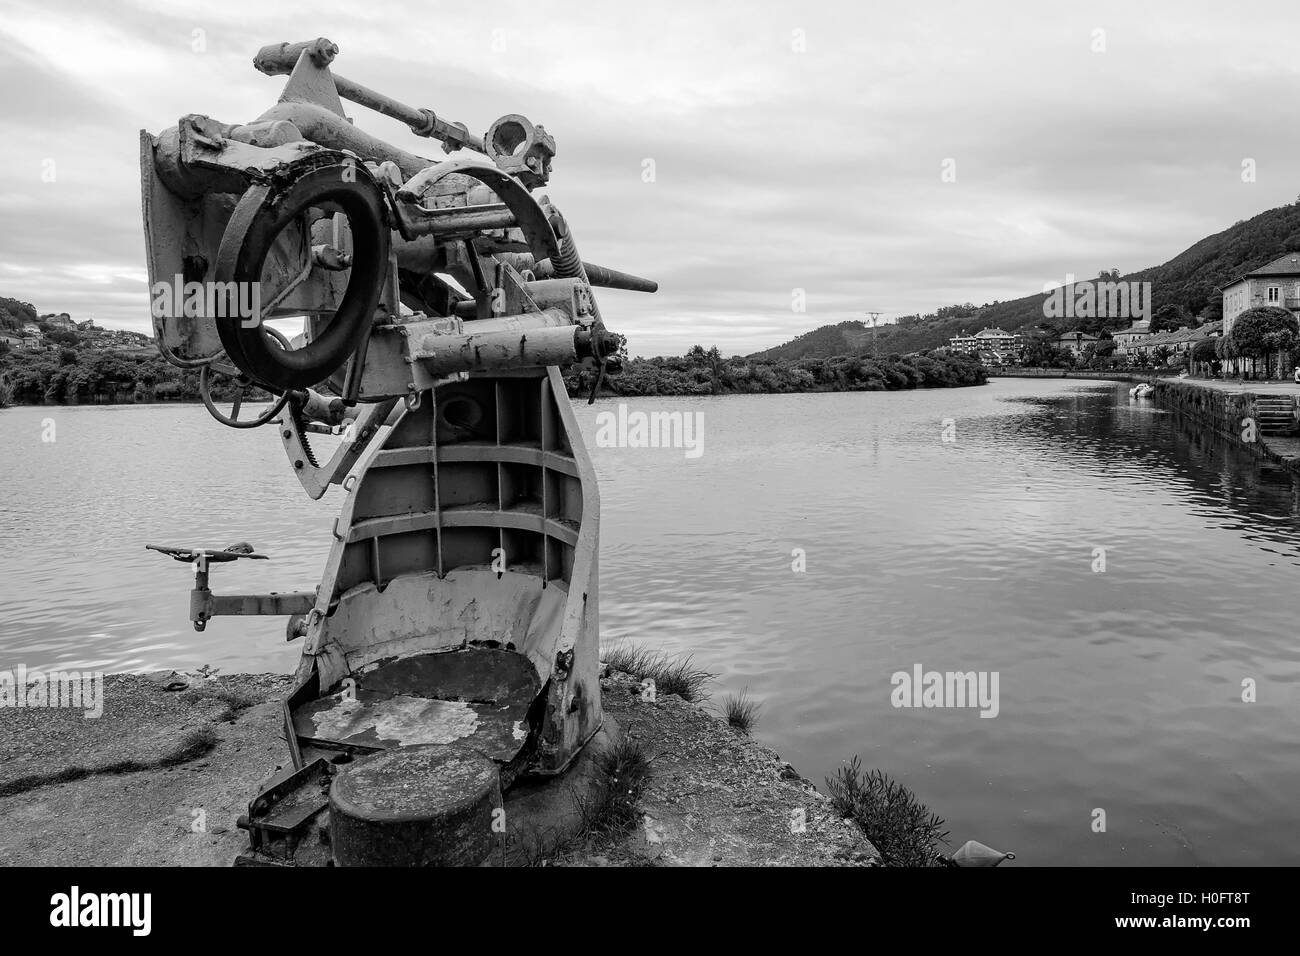 A battleship radar Navy in the Spanish Army Museum Park in Limpias Cantabria, northern Spain, Europe Stock Photo